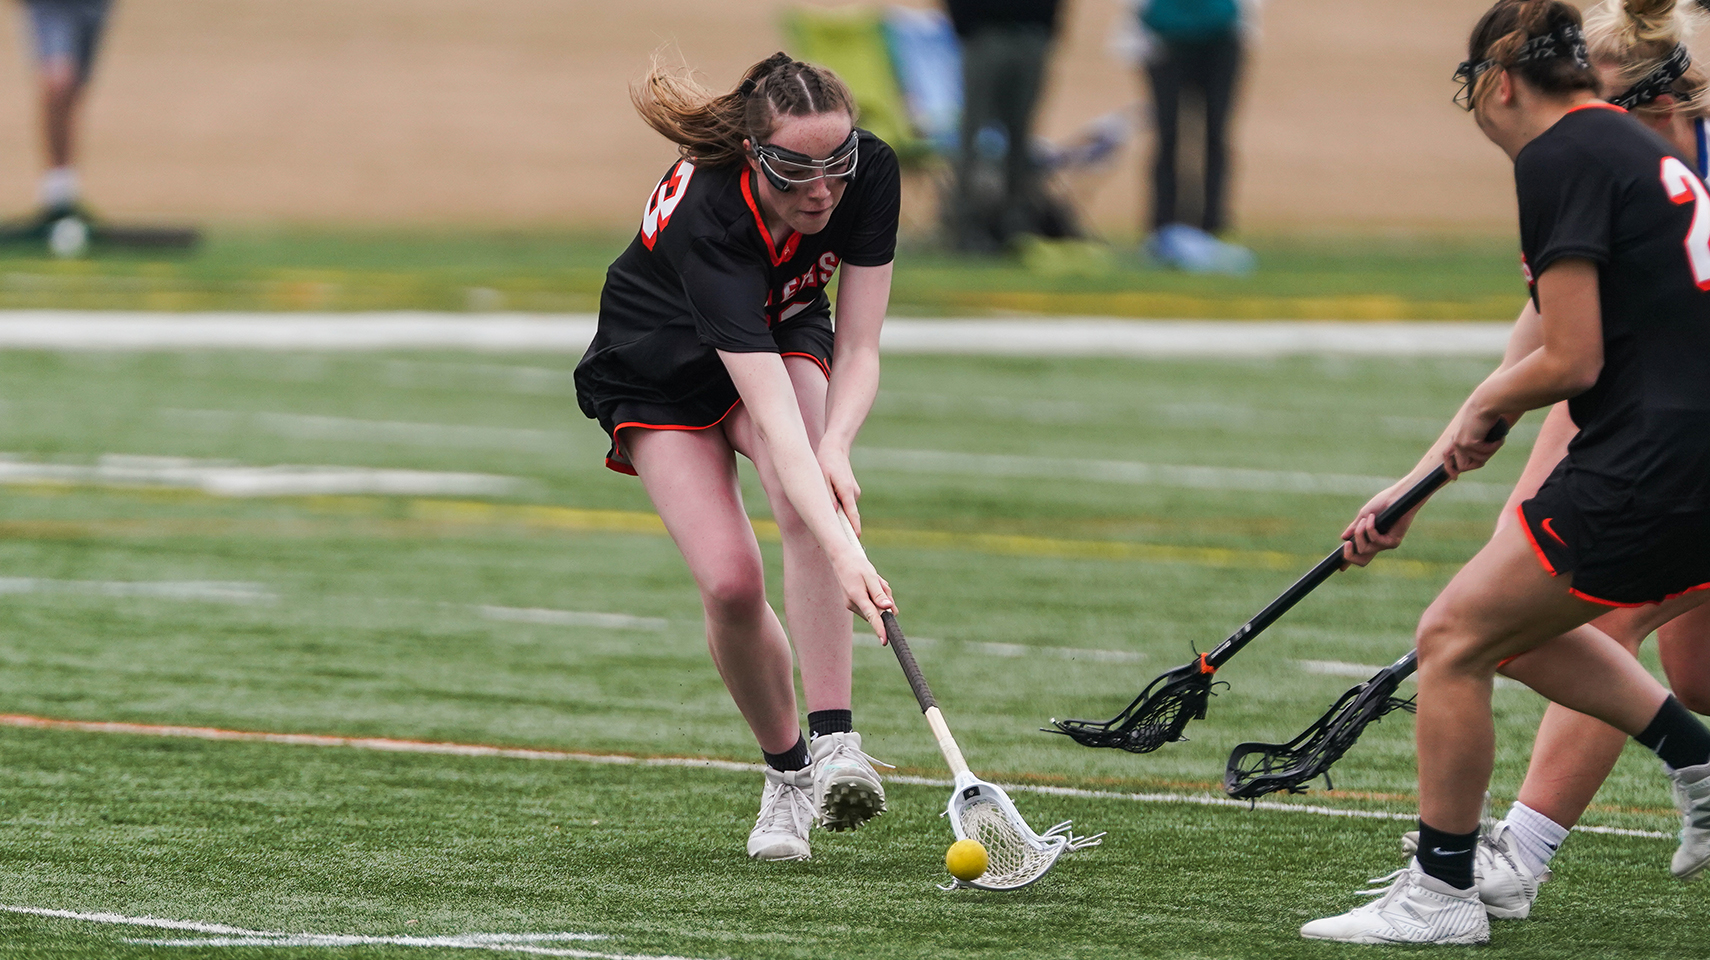 Women's lacrosse player picking up a ball